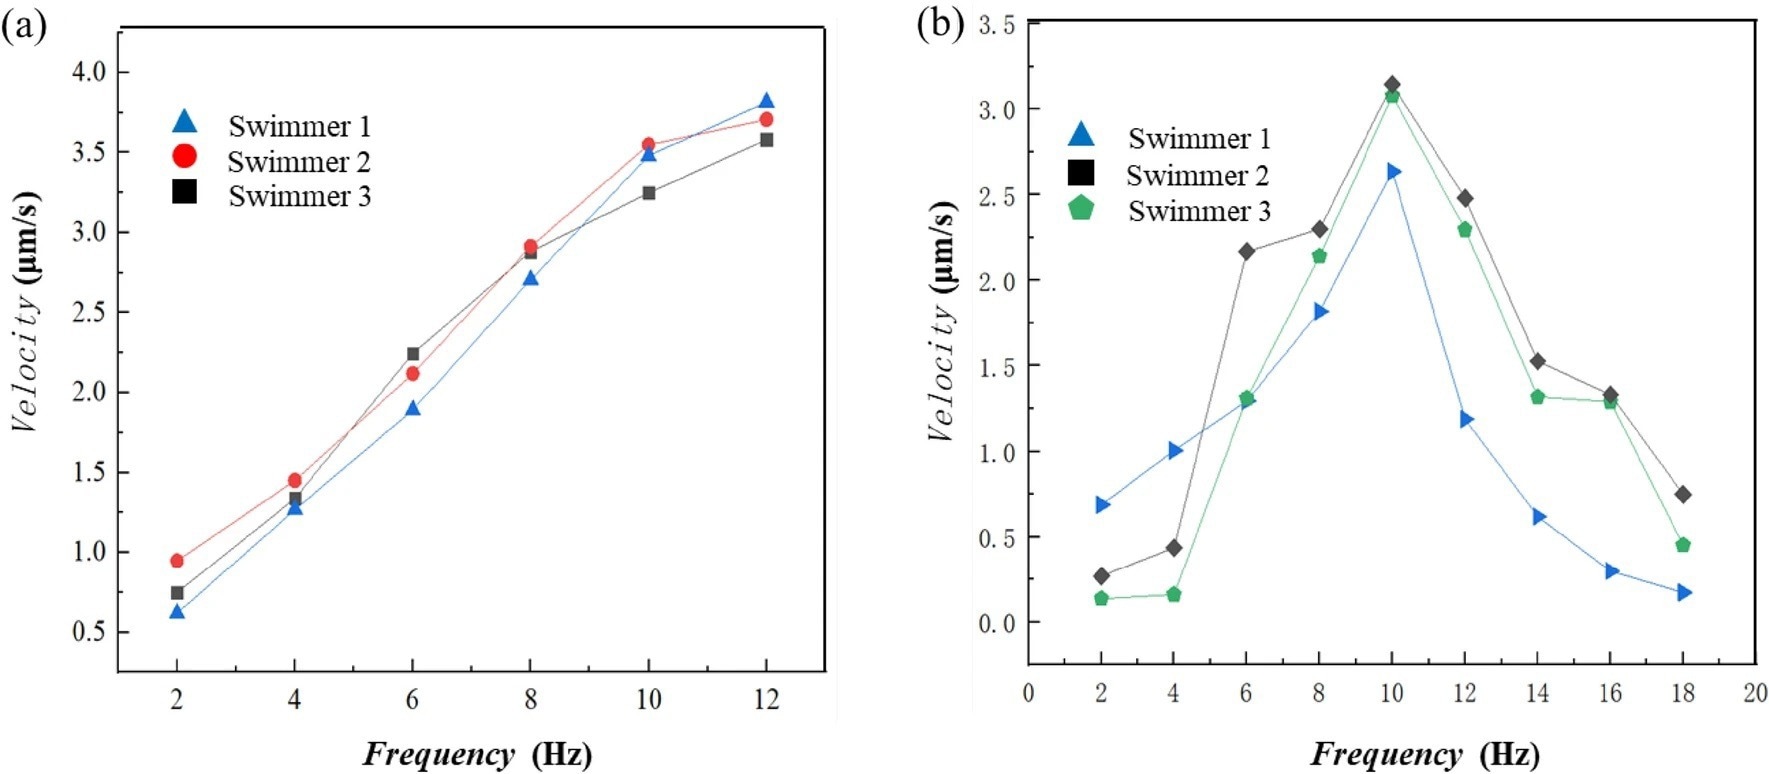 Velocity profiles of the nanorobots. (a) linear velocity profiles when the magnetic field frequency and strength increased proportionally. (b) nonlinear velocity profiles when the magnetic field strength remains constant at 2 mT while the frequency increases; step-out was observed at 10 Hz.